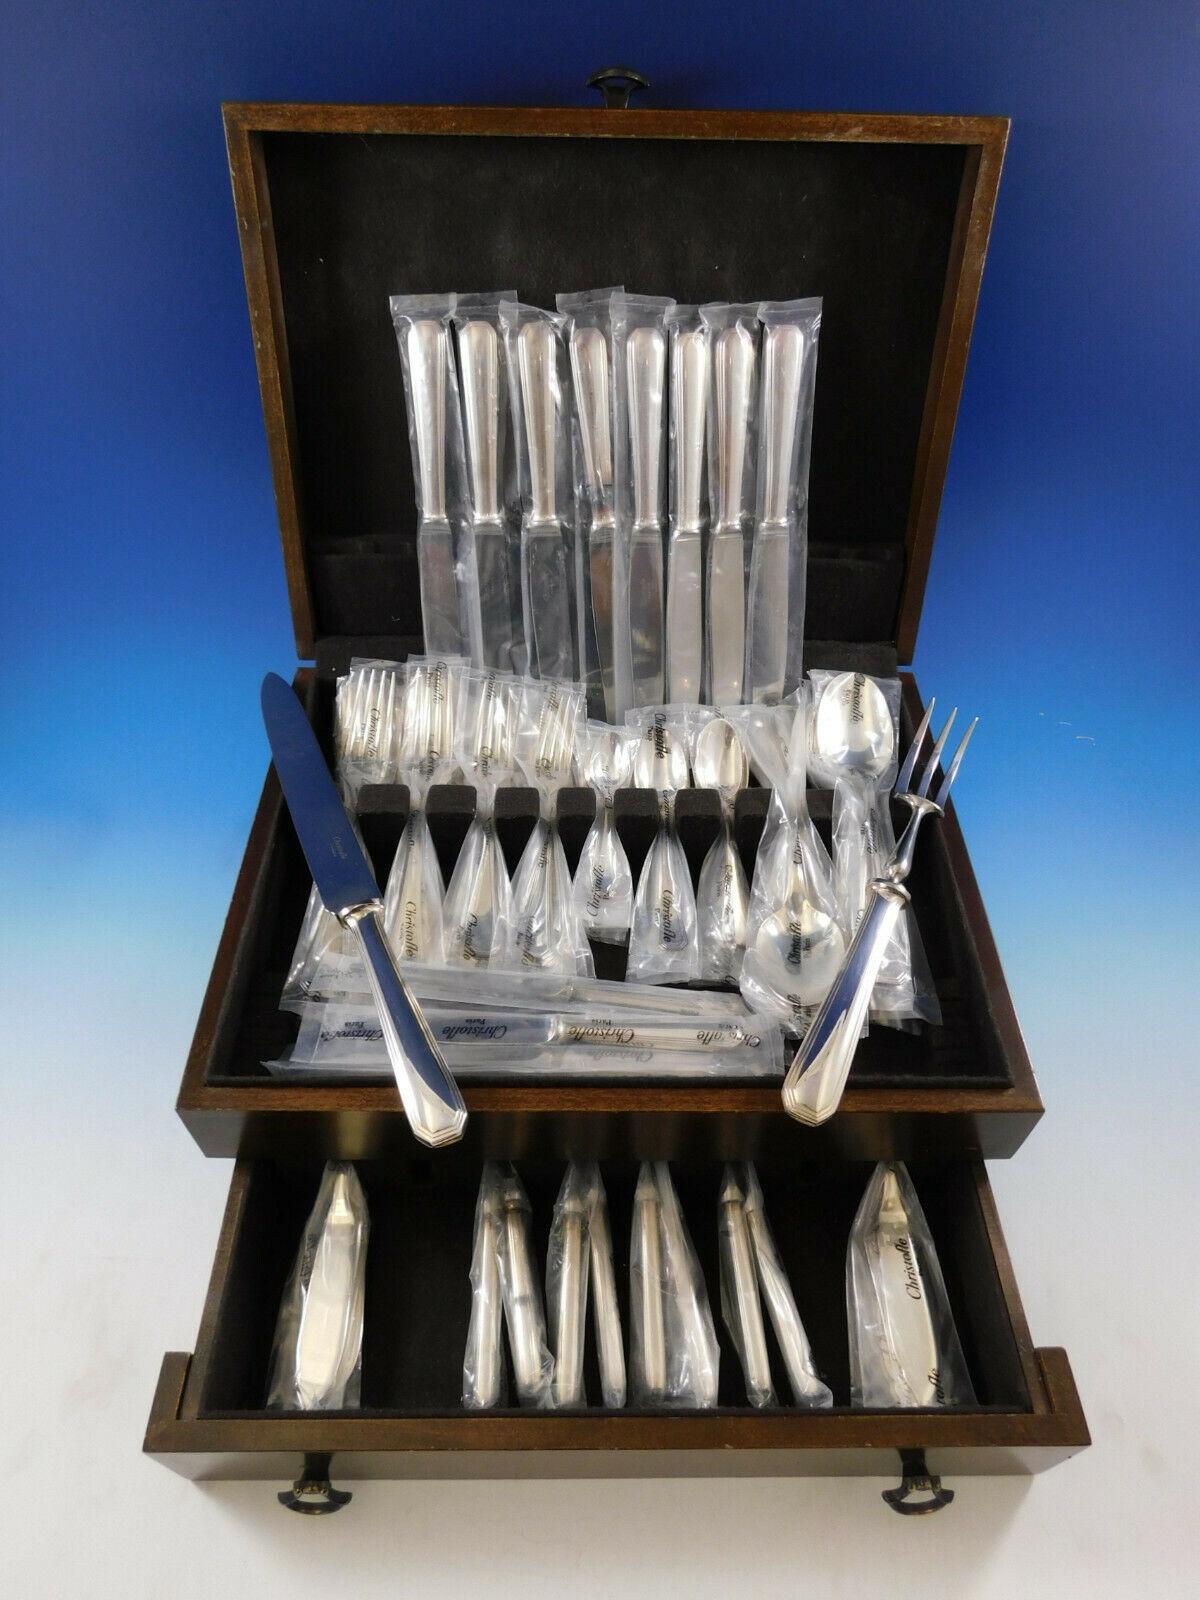 New, unused Dinner Size America by Christofle France silver plate flatware set of 74 pieces. This set includes:

8 dinner size knives, 9 1/2